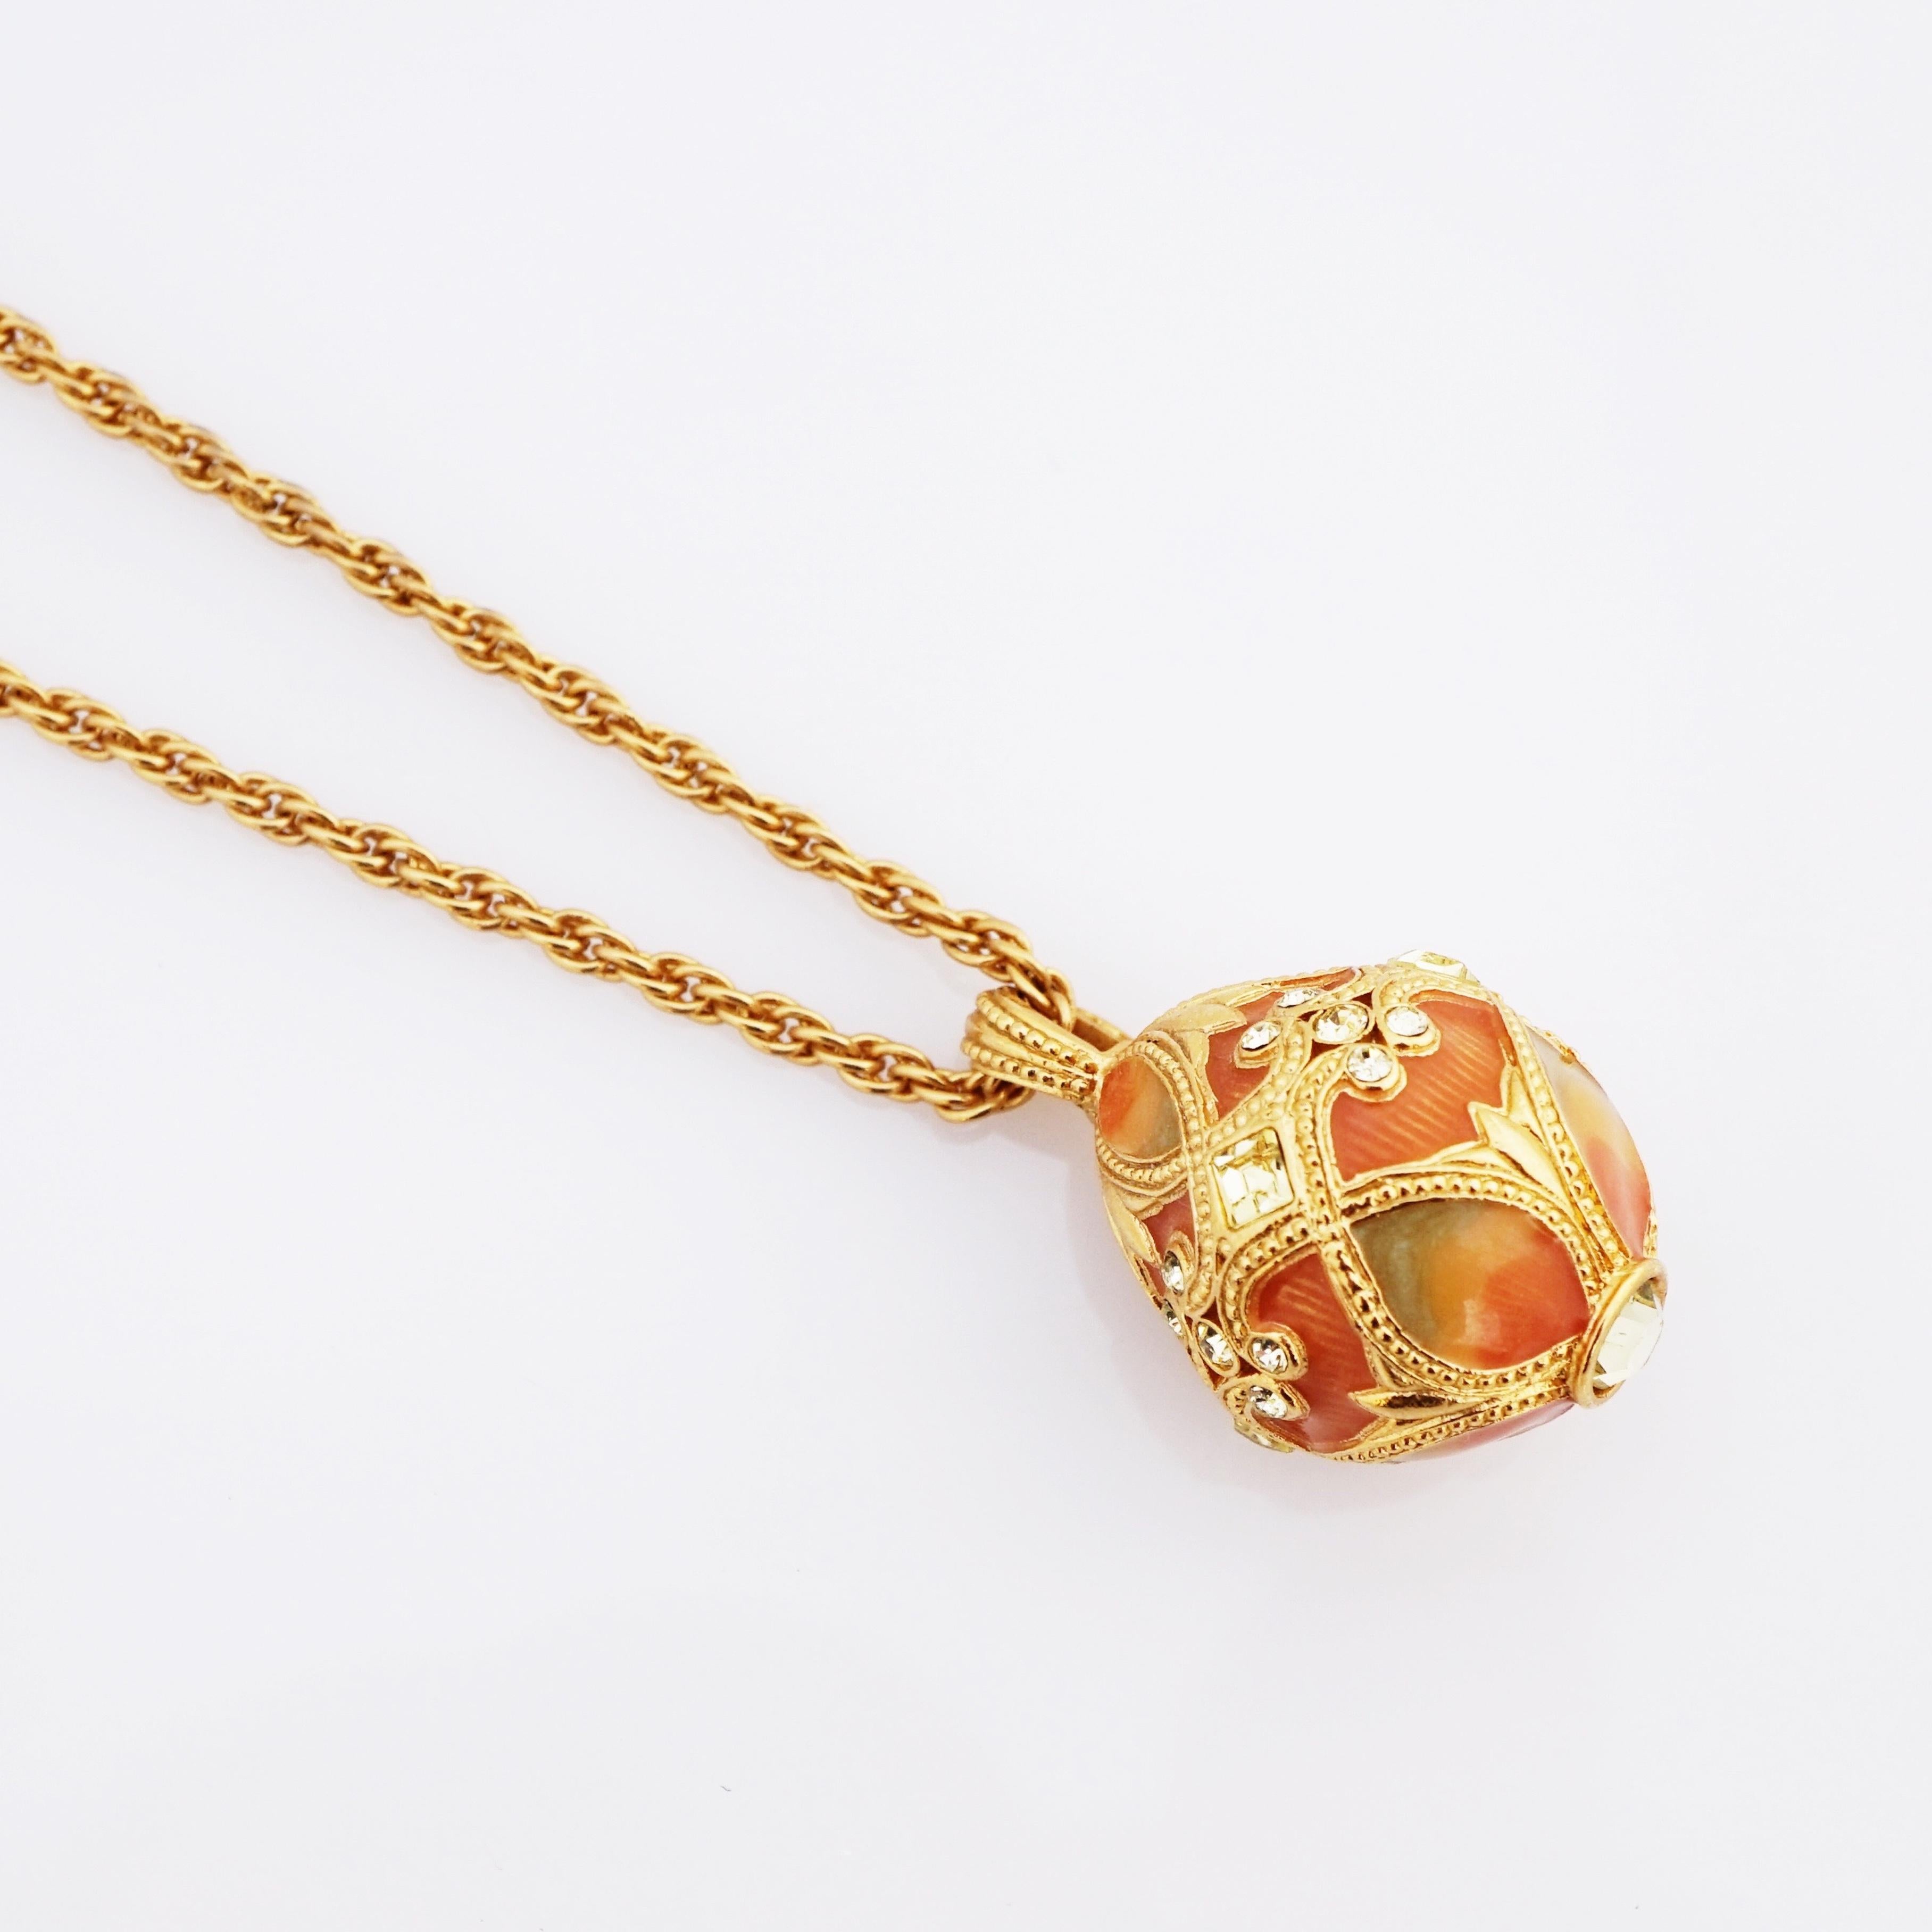 Modern Enameled Egg Pendant Necklace With Rhinestone Accents By Joan Rivers, 1990s